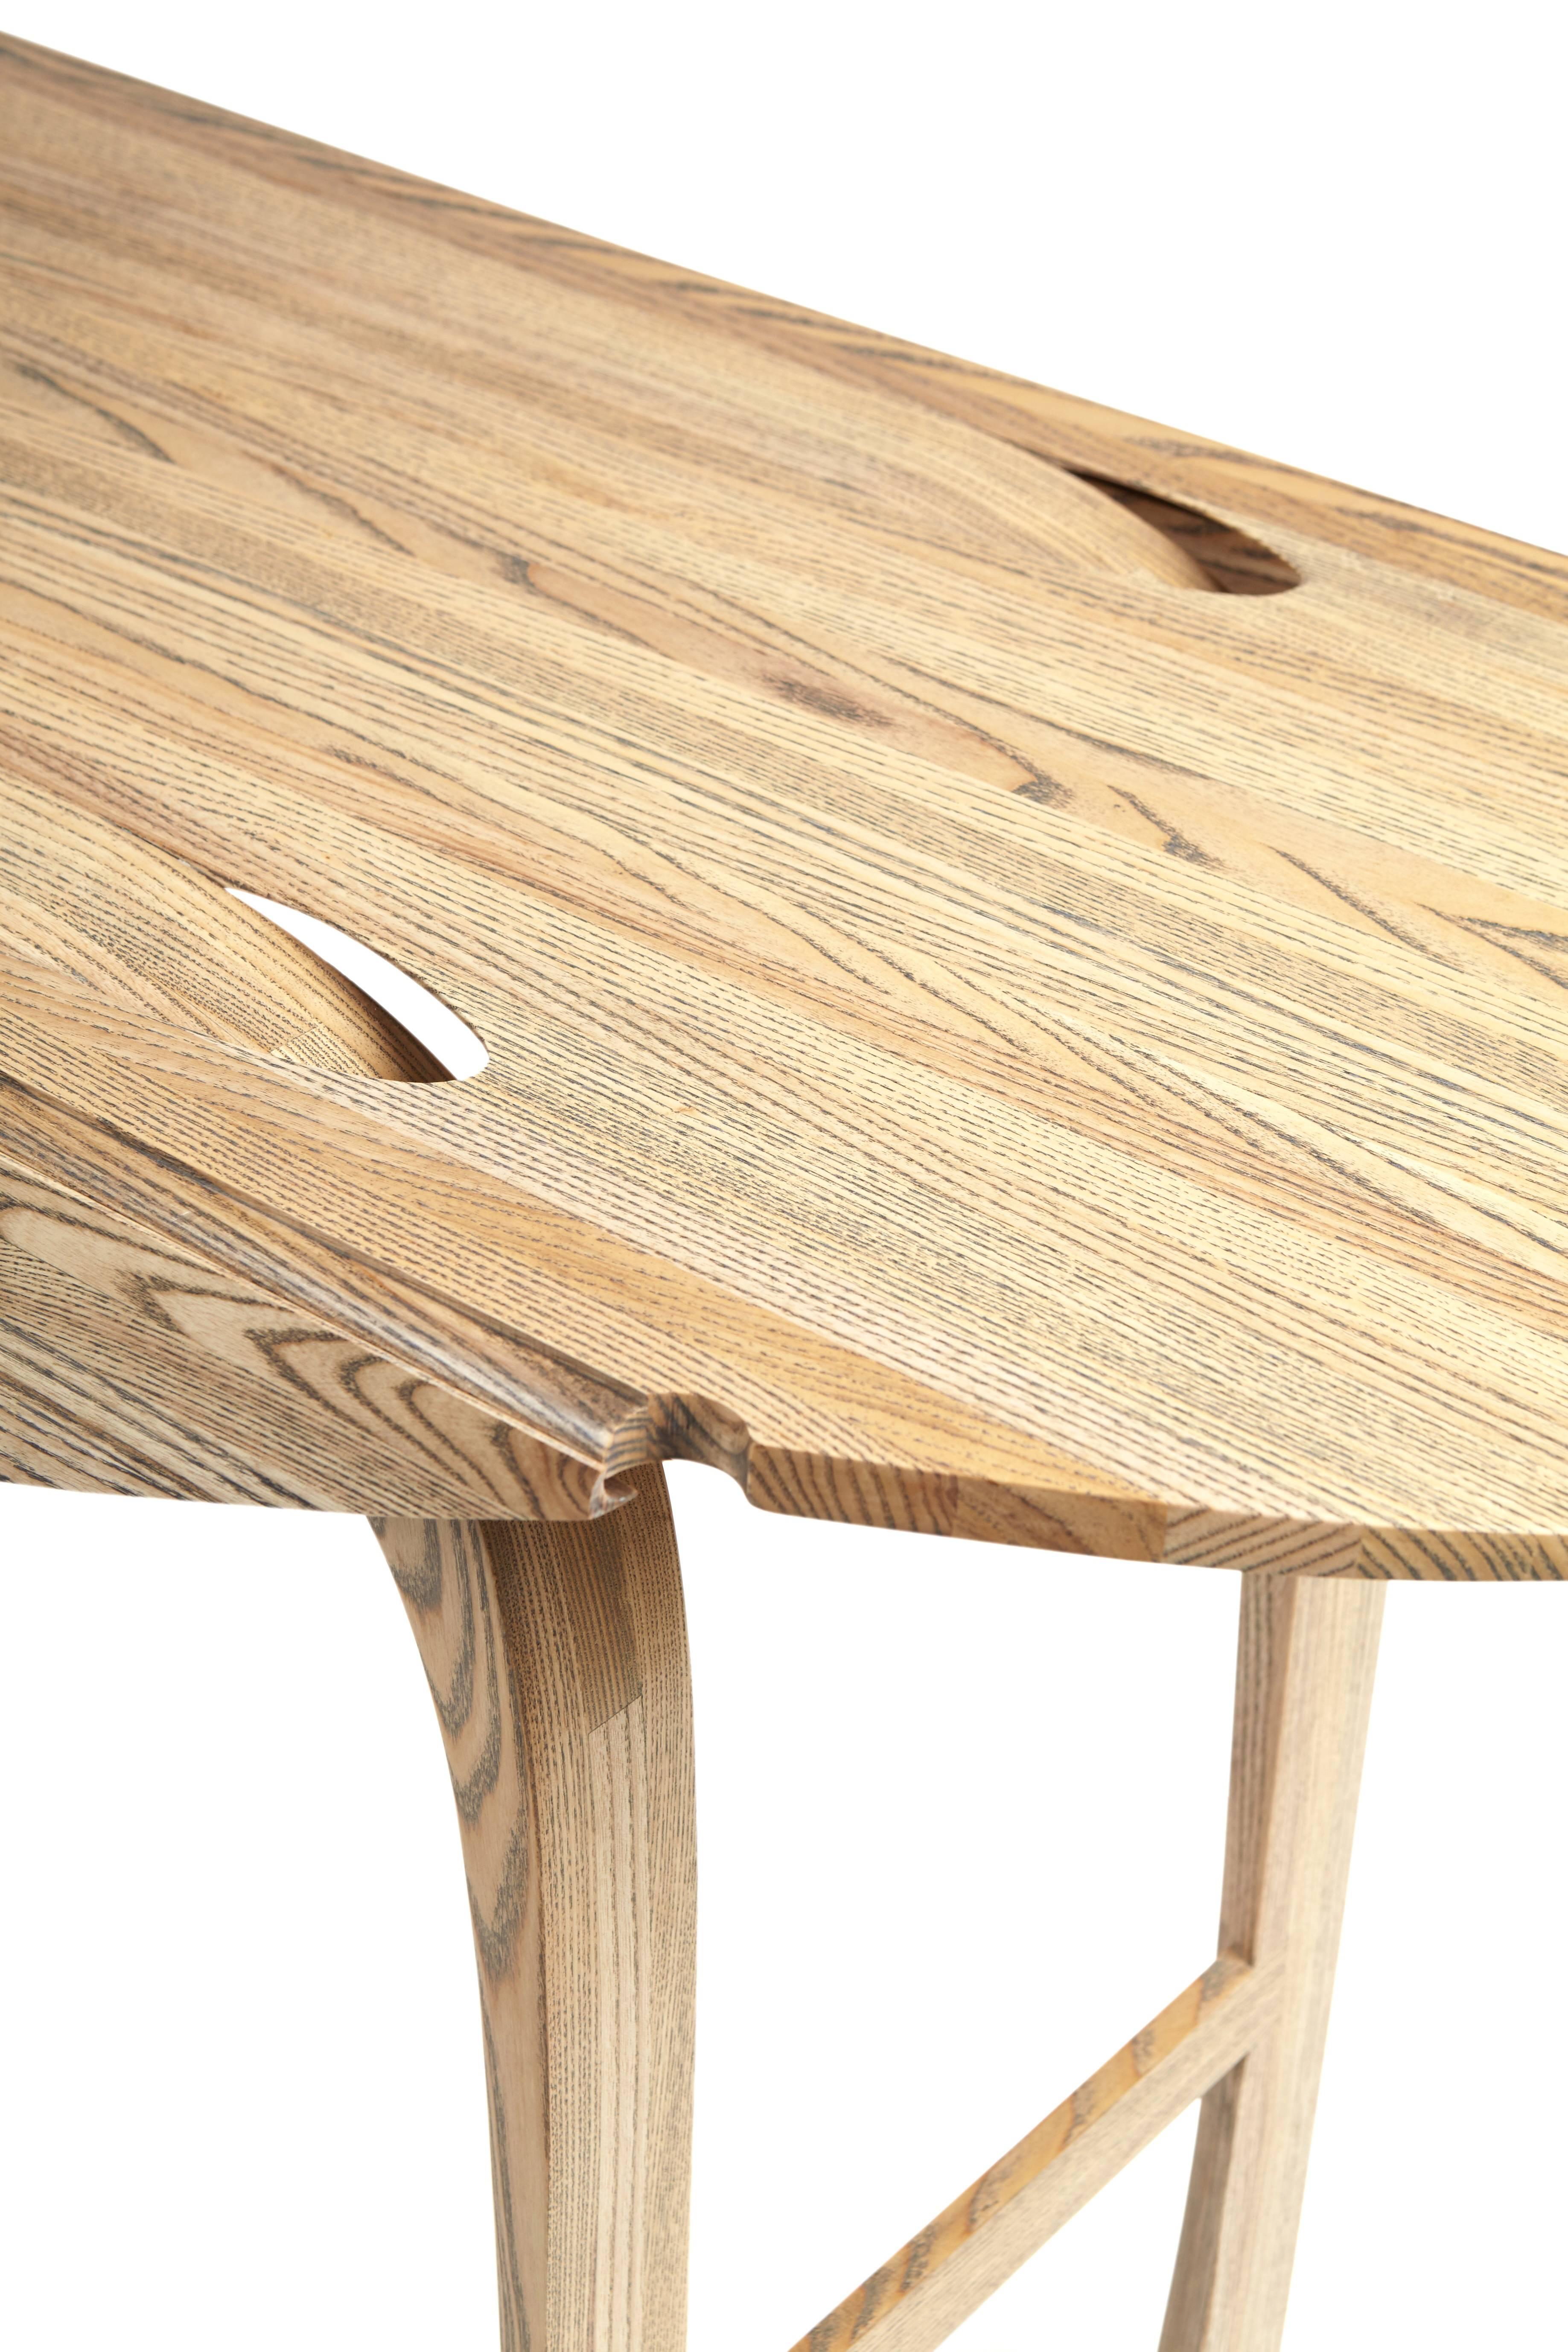 Laminated Oval Drop-Leaf Table in solid ebony grain and white oil ash by Jonathan Field